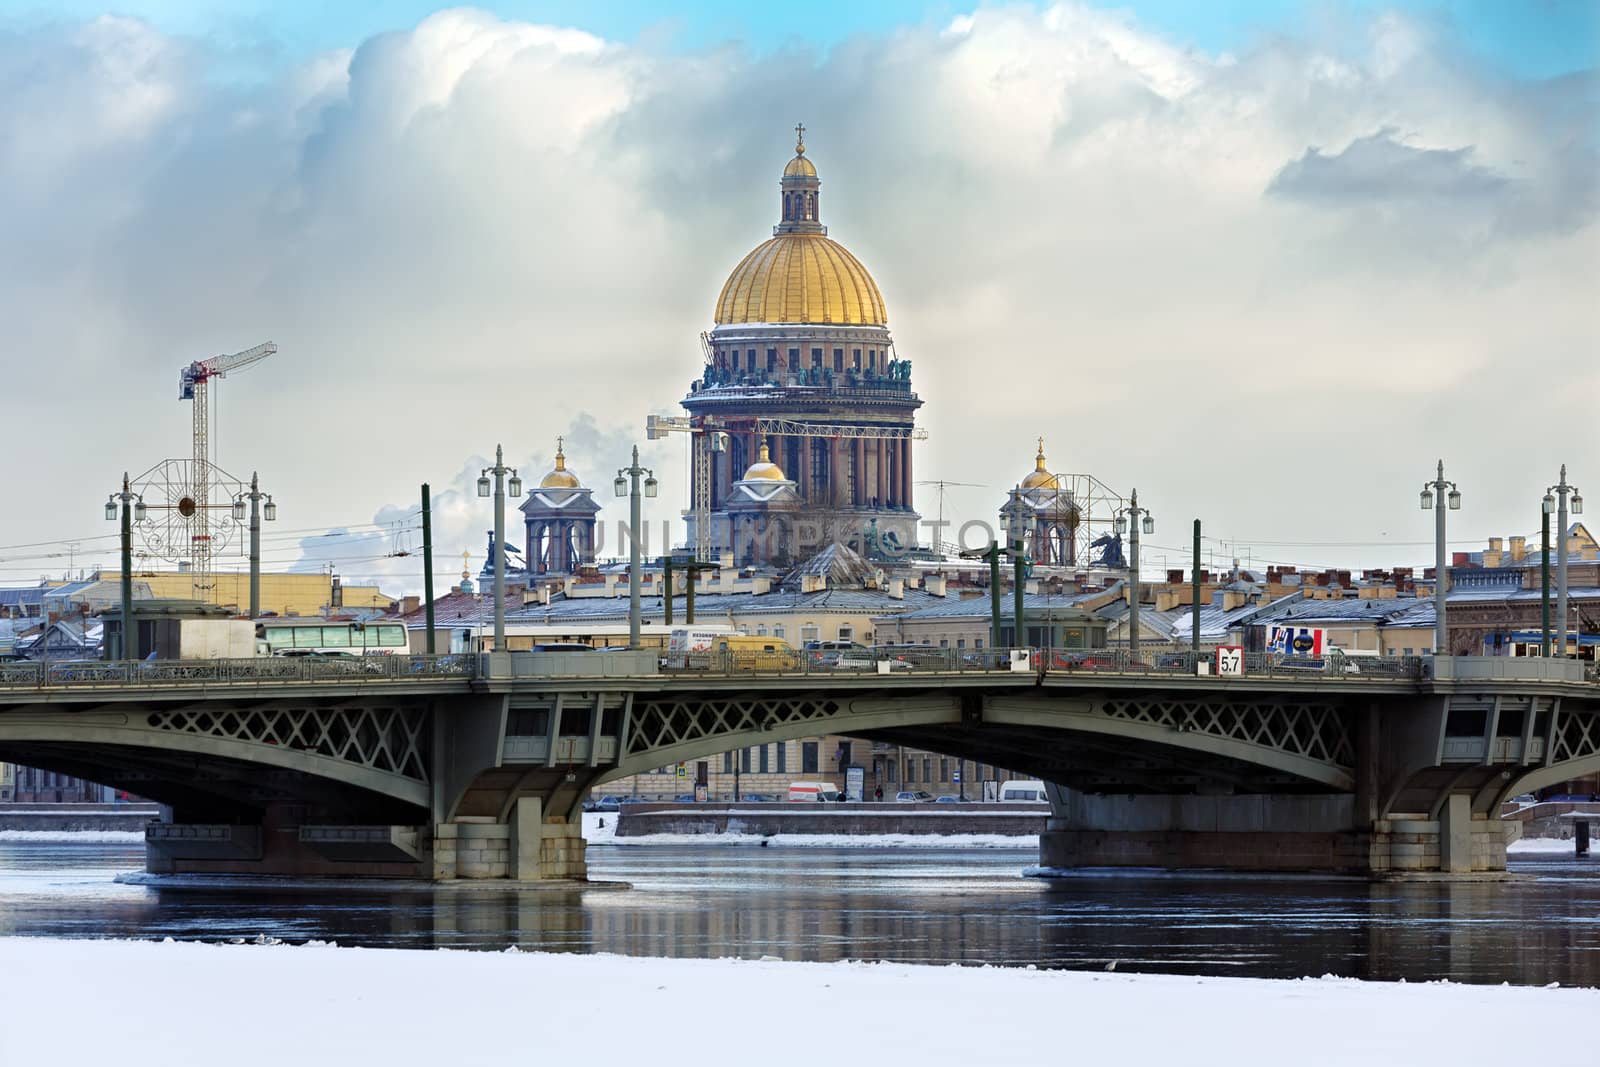 Blagoveshchensky bridge in St. Petersburg and St. Isaac Cathedral